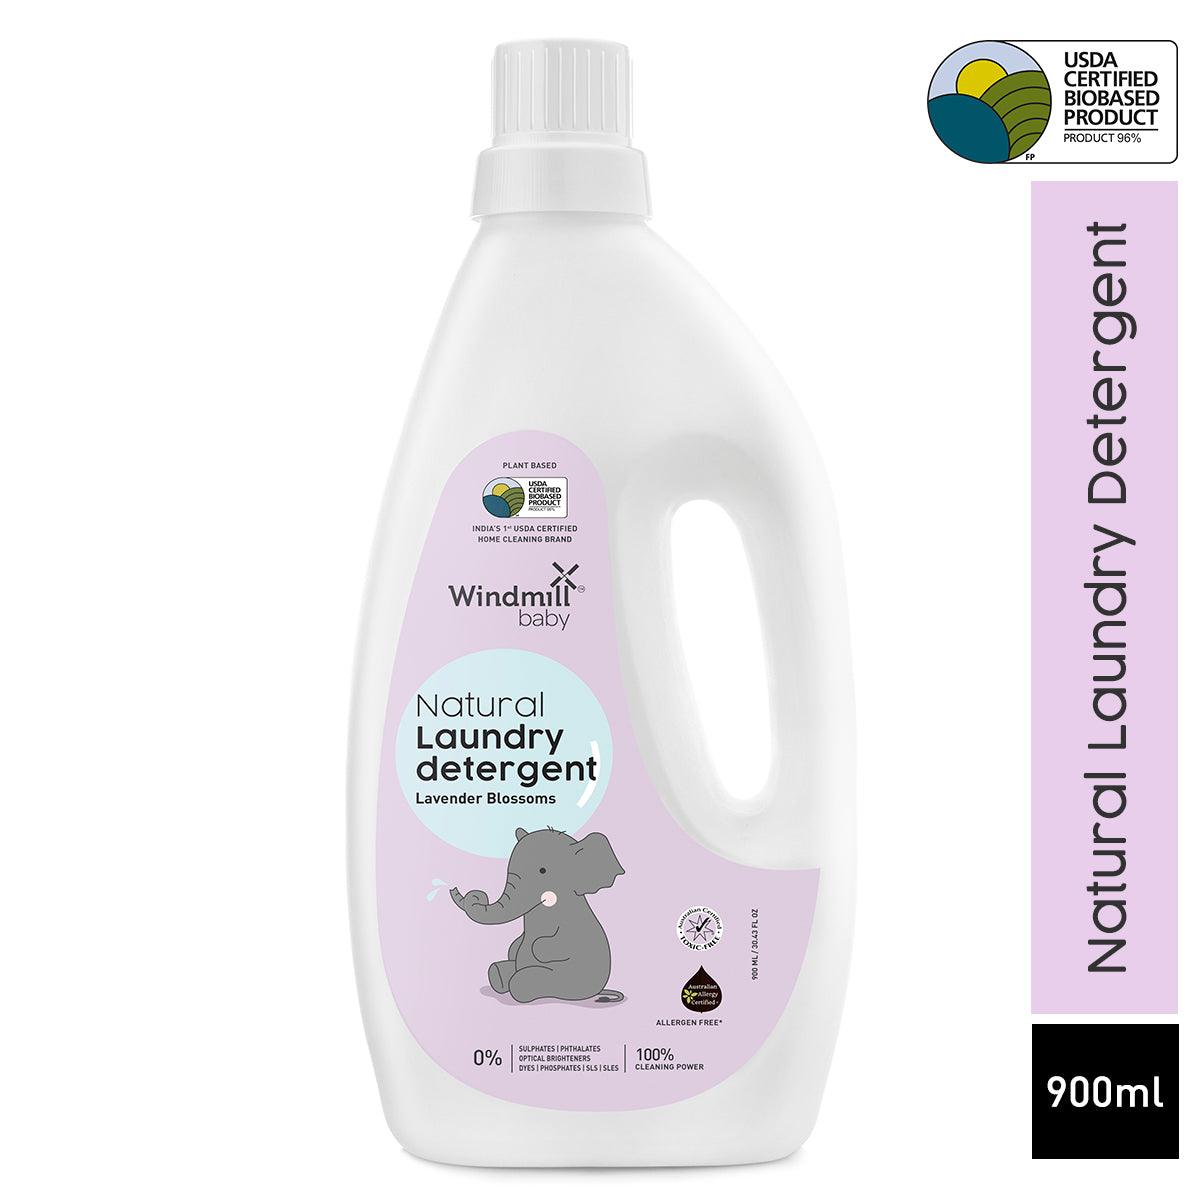 Windmill Baby Natural Lavender Blossoms Laundry Detergent Liquid, USDA Certified, Allergen Free, Plant Based With Bio-Enzymes - 900 ml